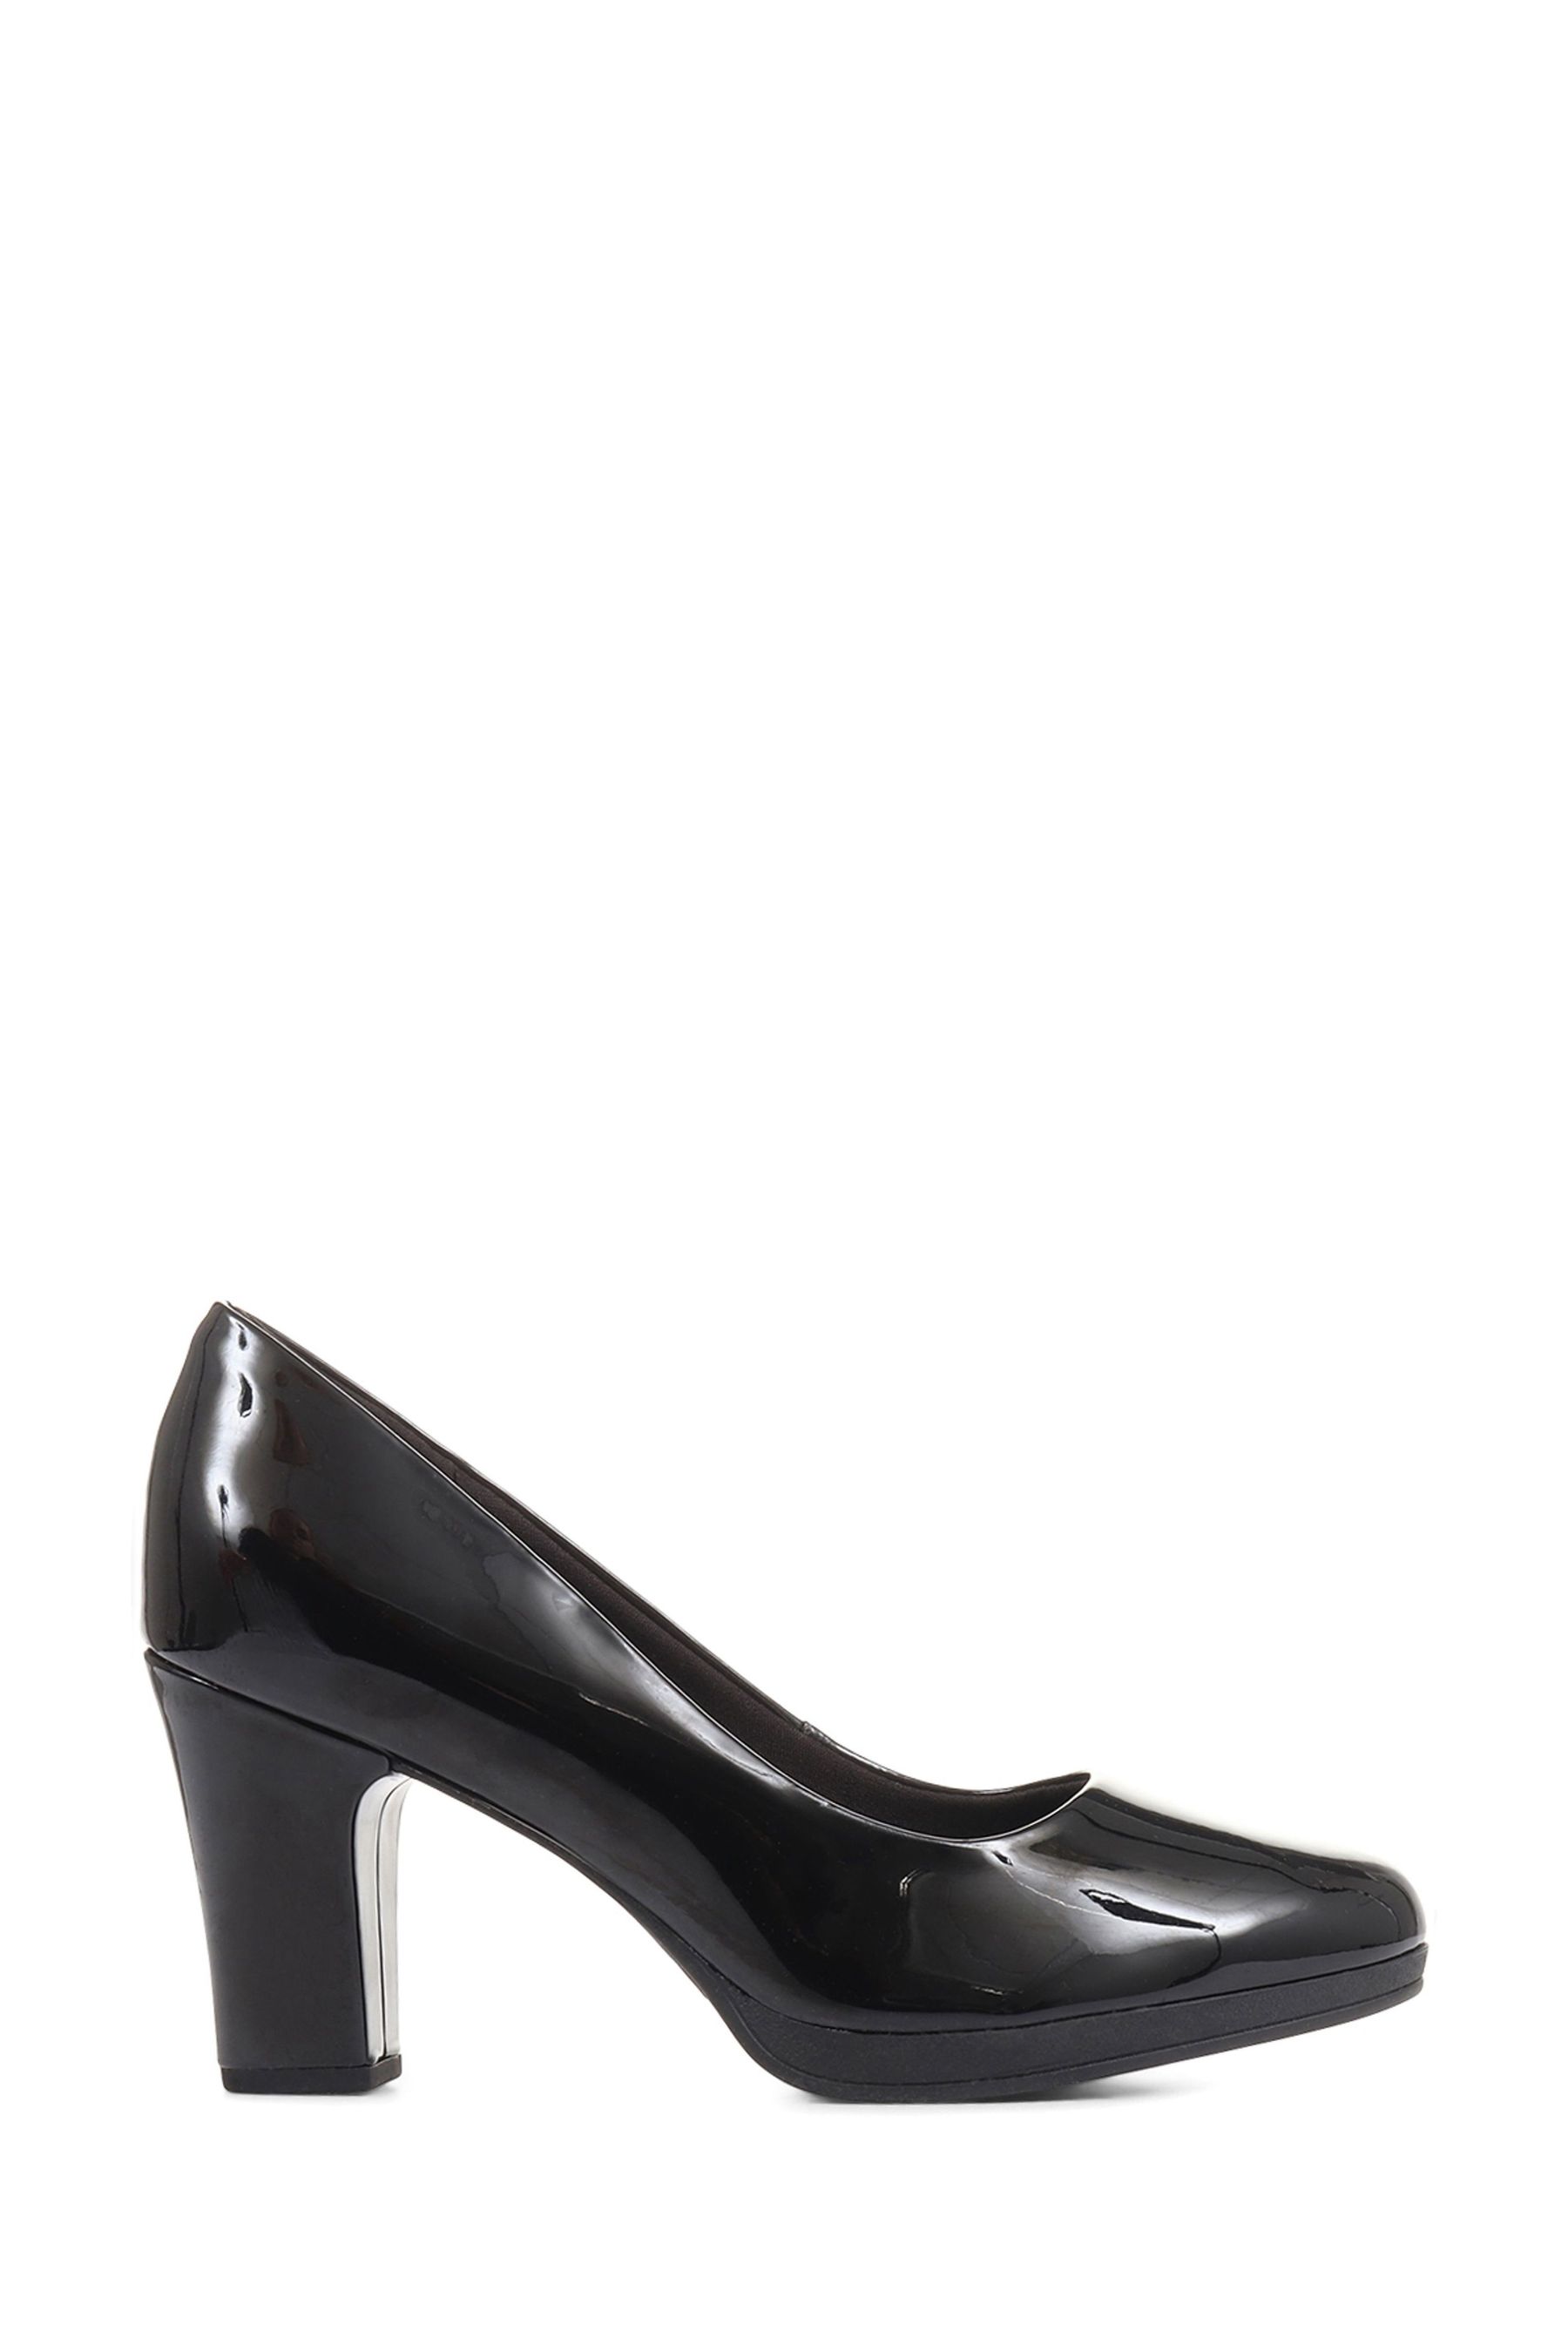 Buy Pavers High Heel Black Court Shoes from the Next UK online shop